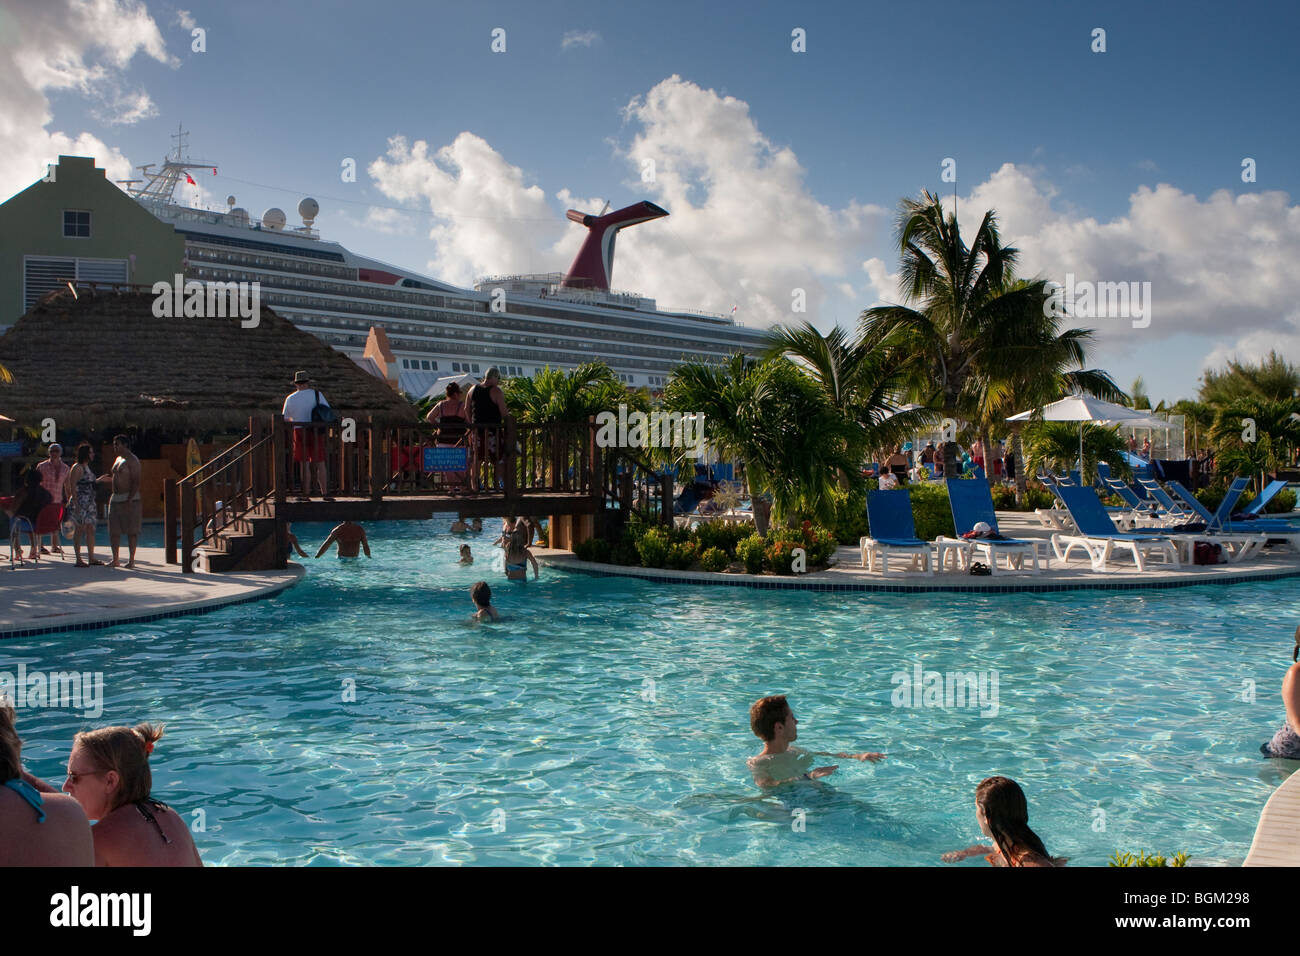 Cruise port, Grand Turk Island, Margaritaville pool, with puffy clouds, and Carnival cruise ship in background.  BWI Stock Photo